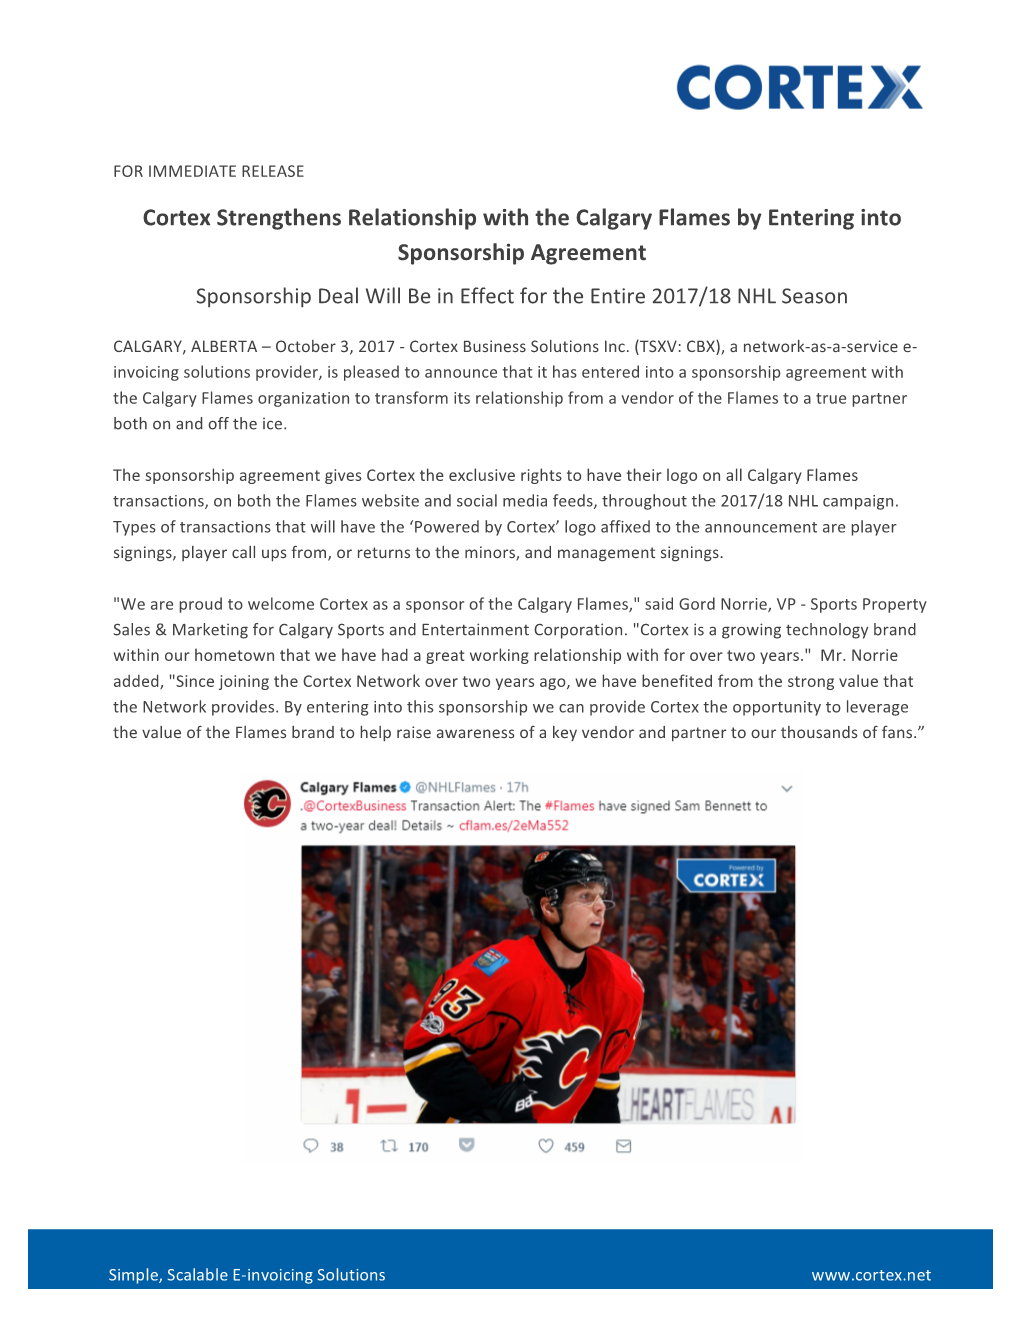 Cortex Strengthens Relationship with the Calgary Flames by Entering Into Sponsorship Agreement Sponsorship Deal Will Be in Effect for the Entire 2017/18 NHL Season